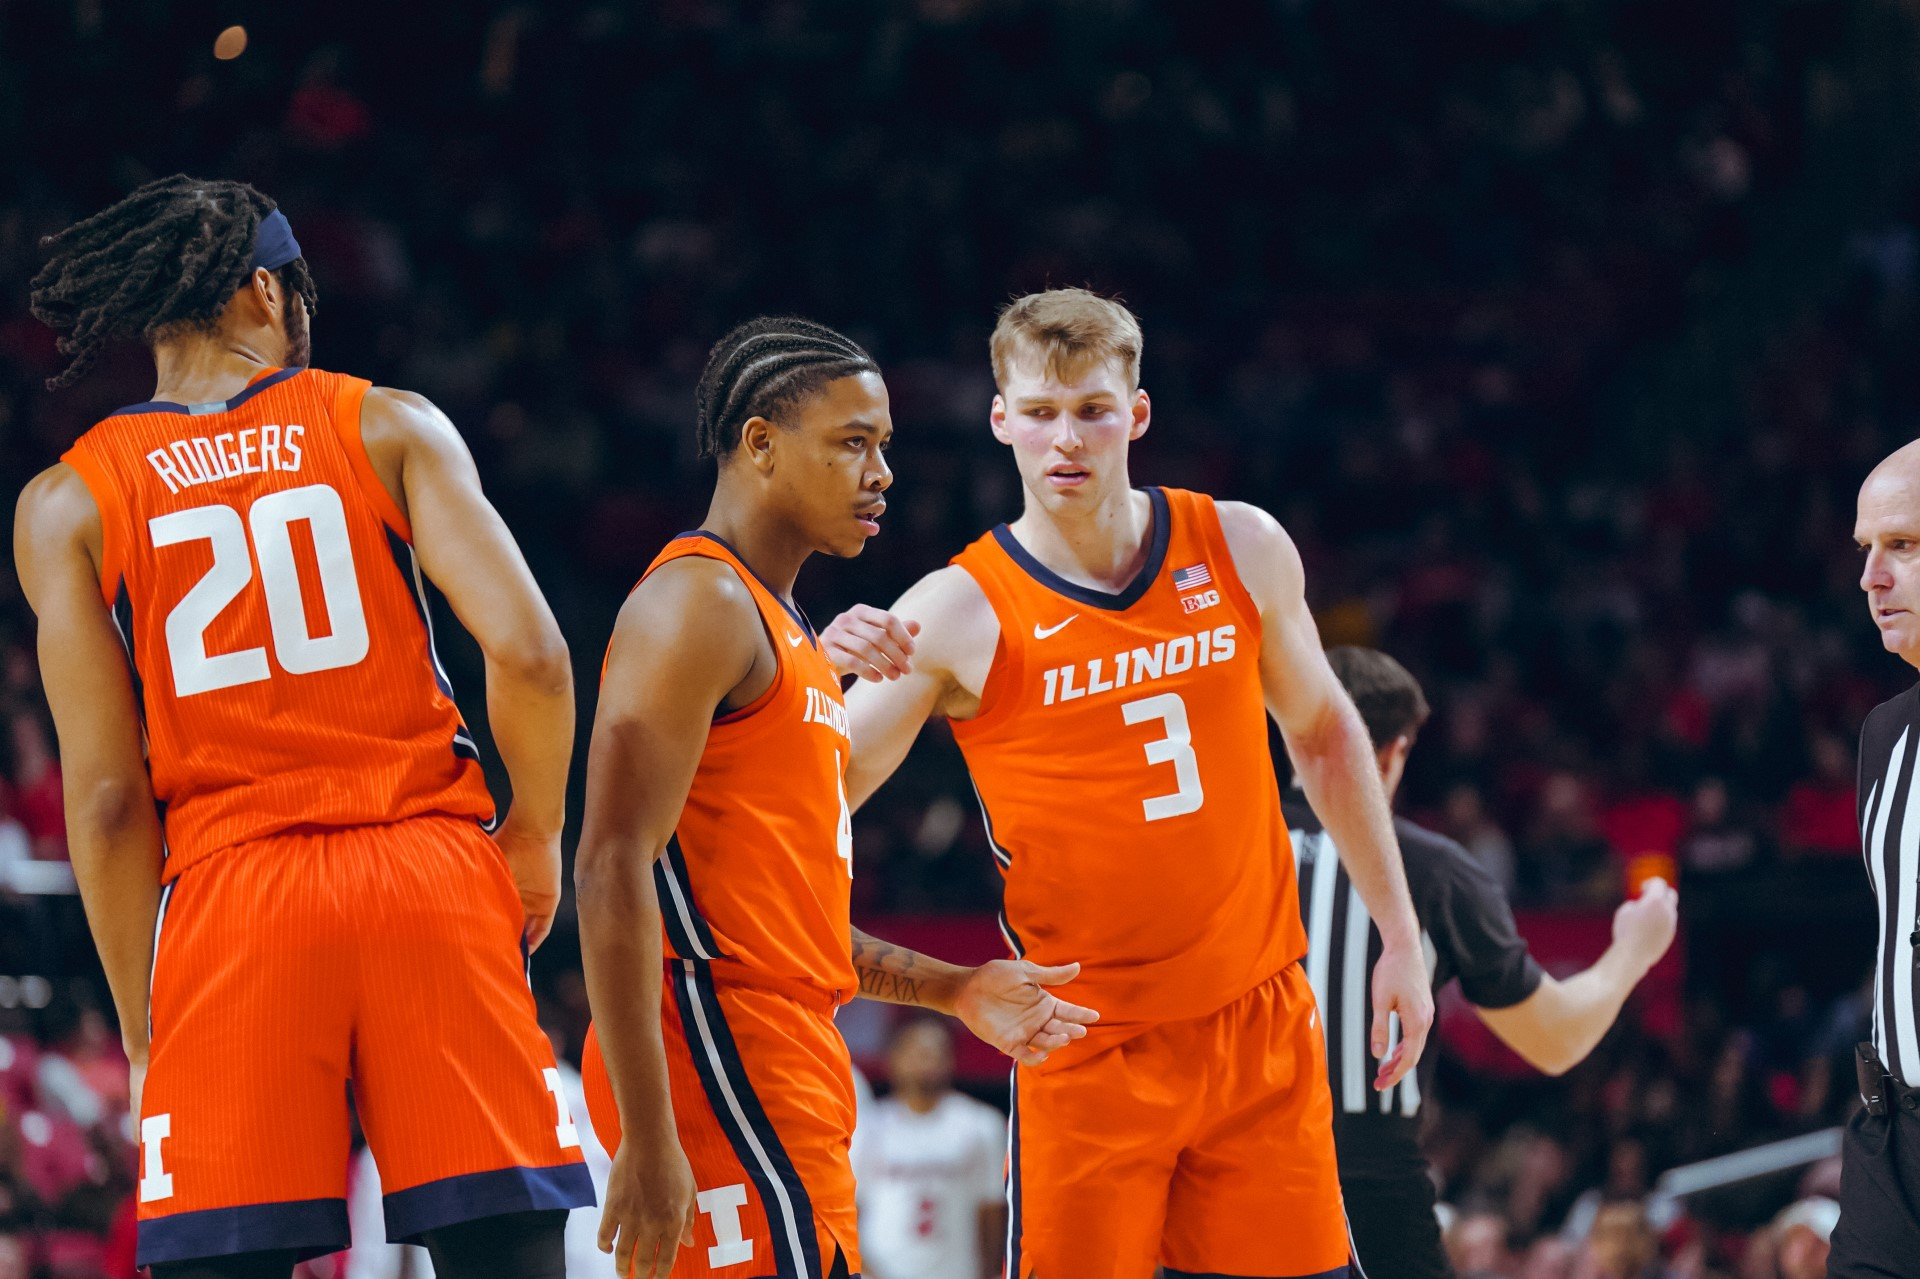 'Had to make winning plays’: Inside Marcus Domask’s Transition Defensive Play Saved Illini in Maryland